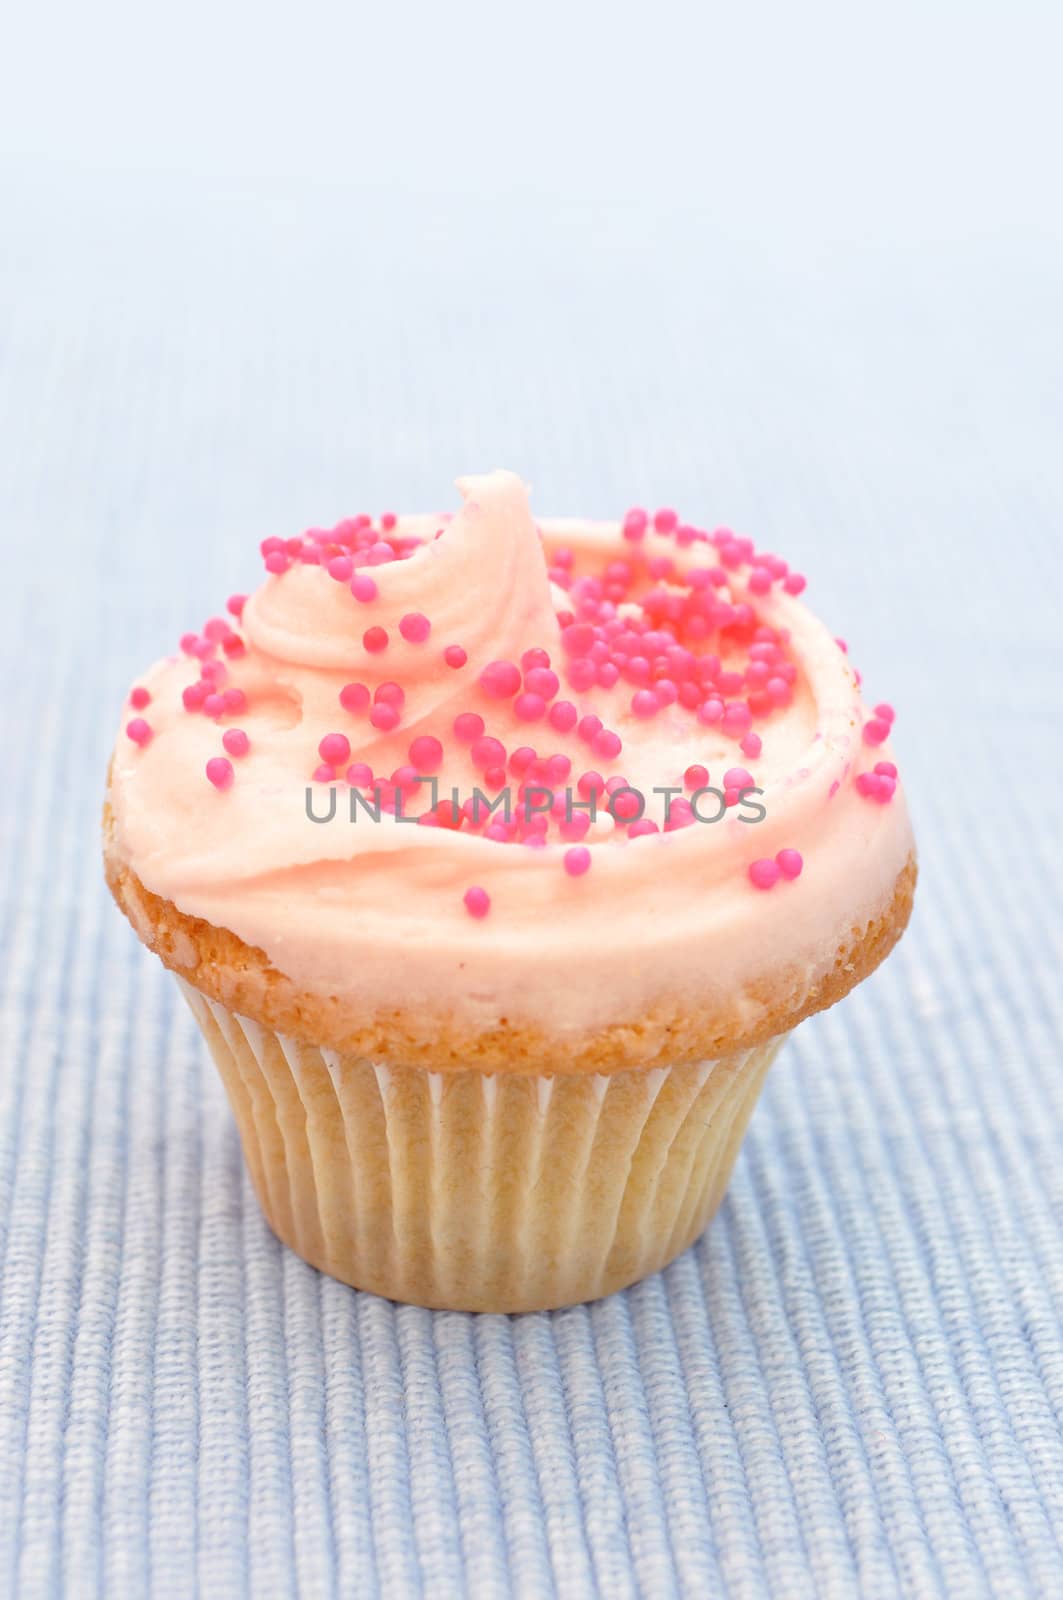 Creamy pink cupcake on a blue tablecloth